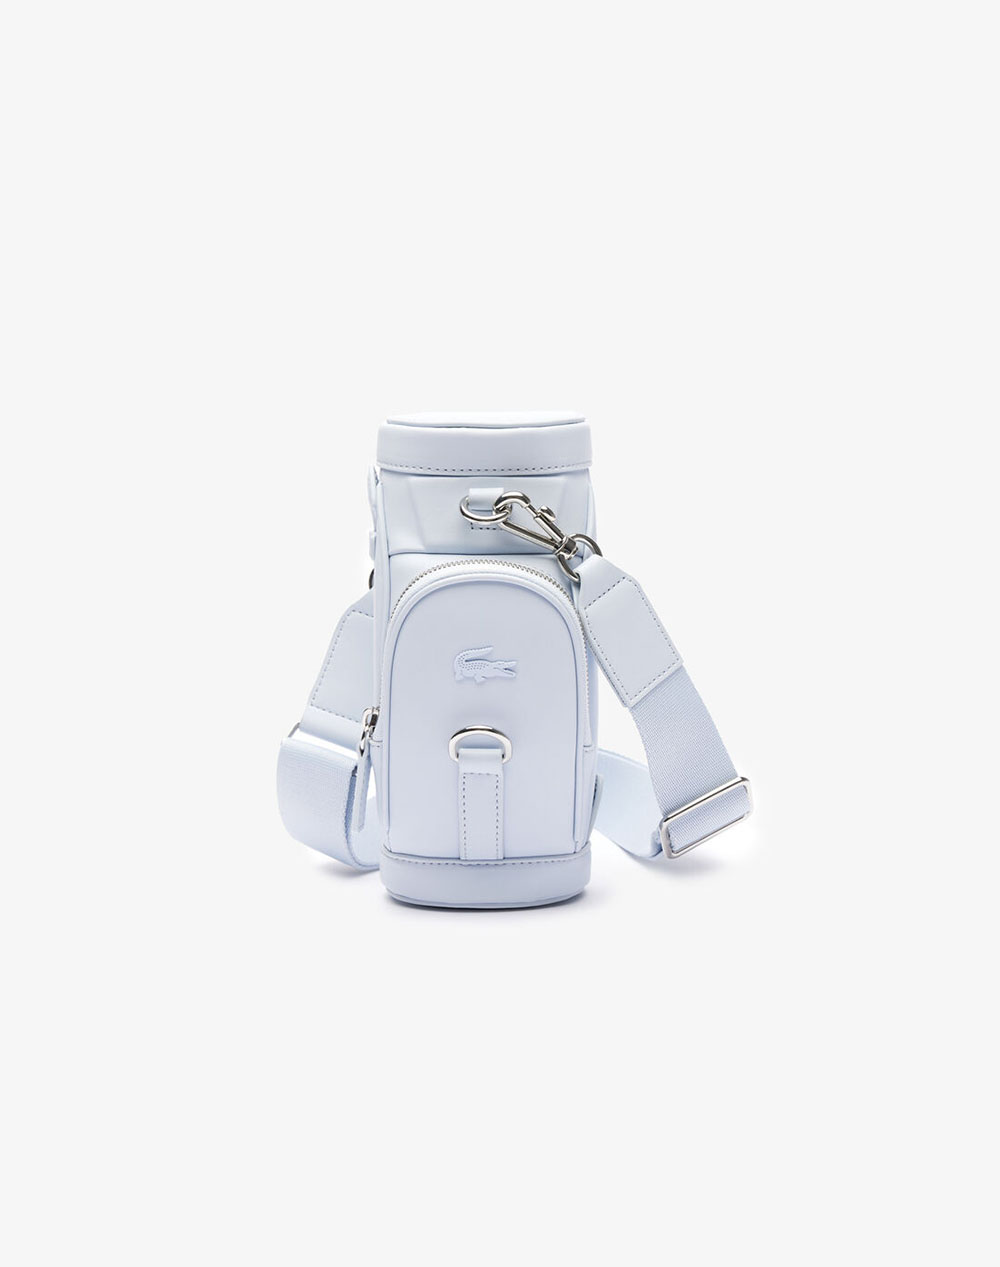 LACOSTE ΤΣΑΝΤΑ XS CROSSOVER BAG 3NF4616MD-N14 LightBlue